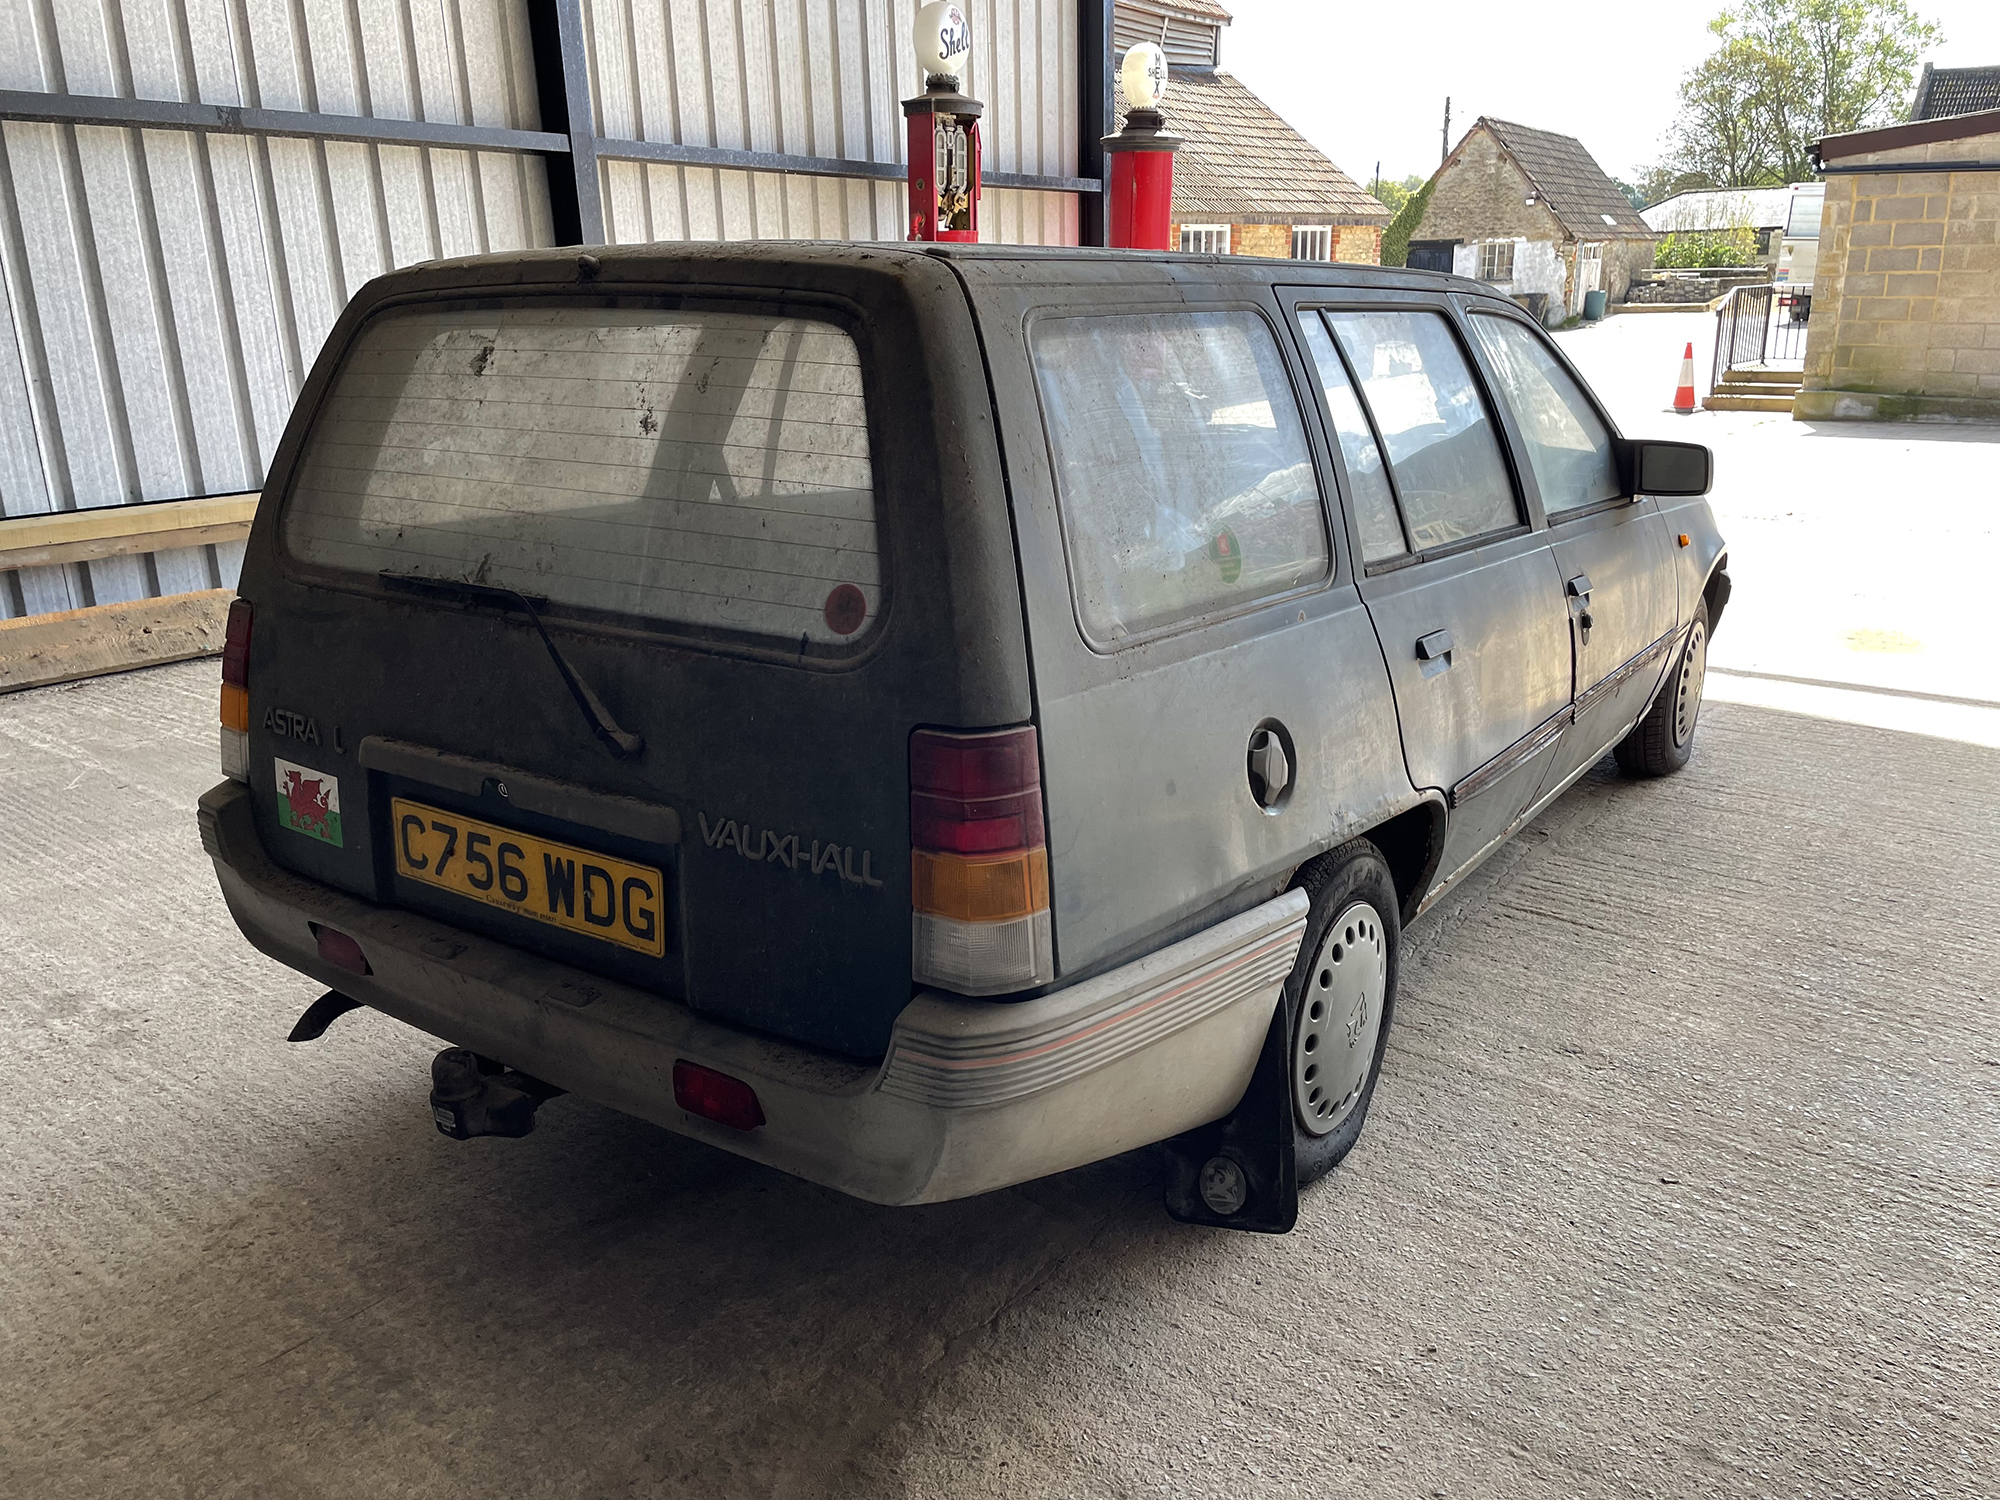 1986 Vauxhall Astra Estate Reg. no. C756 WDG Chassis no. W0L0004662557458 - Image 6 of 14